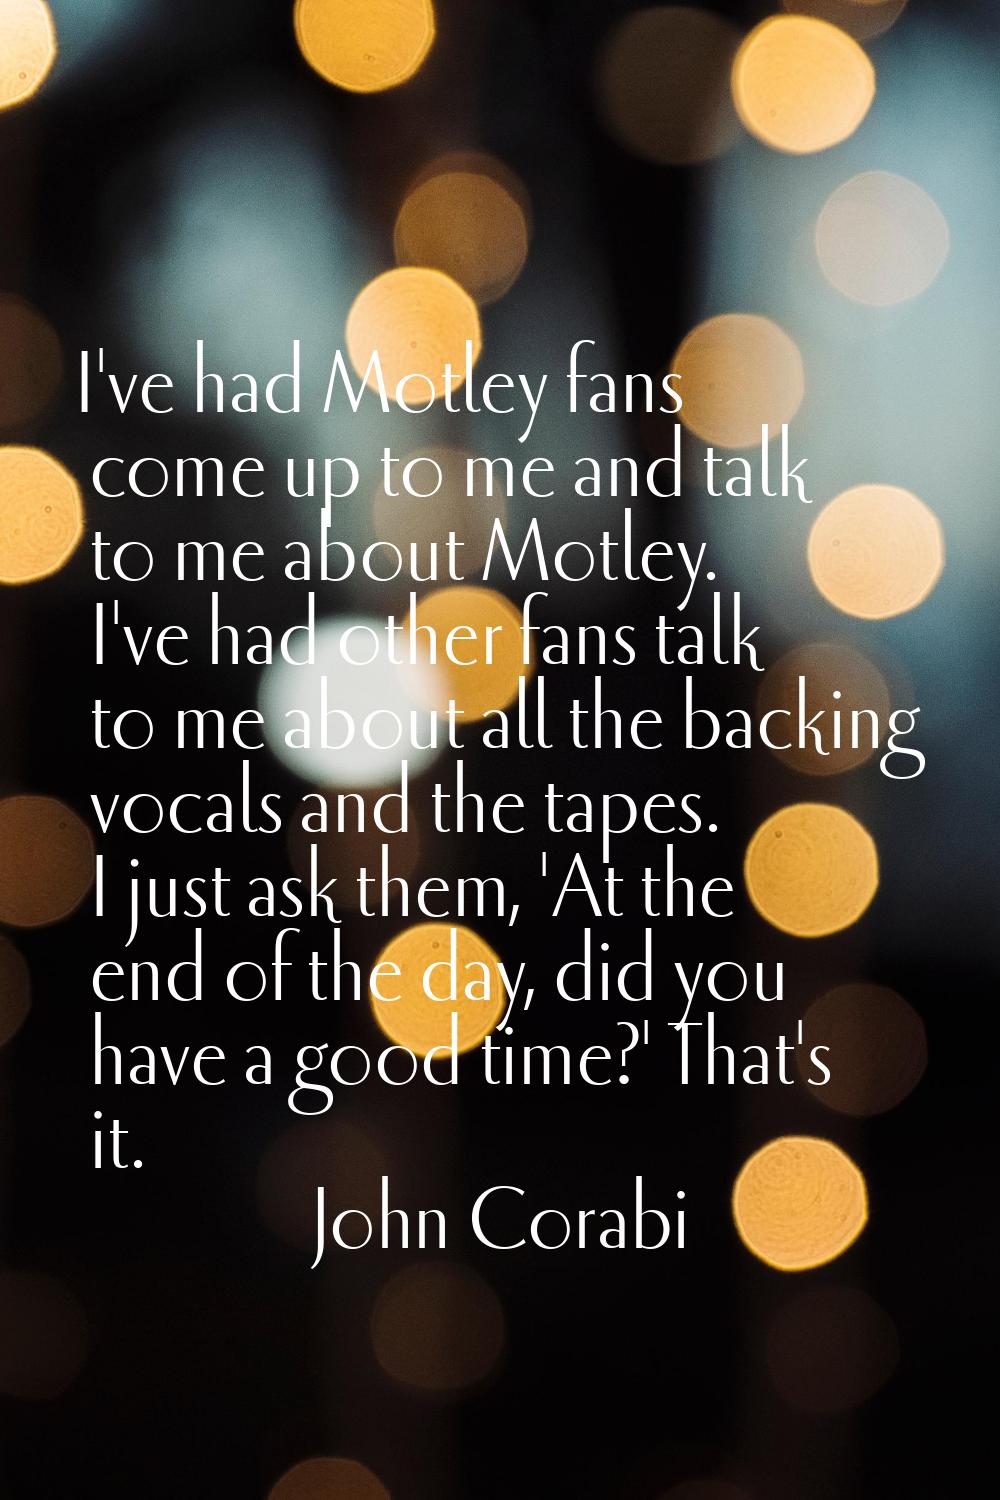 I've had Motley fans come up to me and talk to me about Motley. I've had other fans talk to me abou